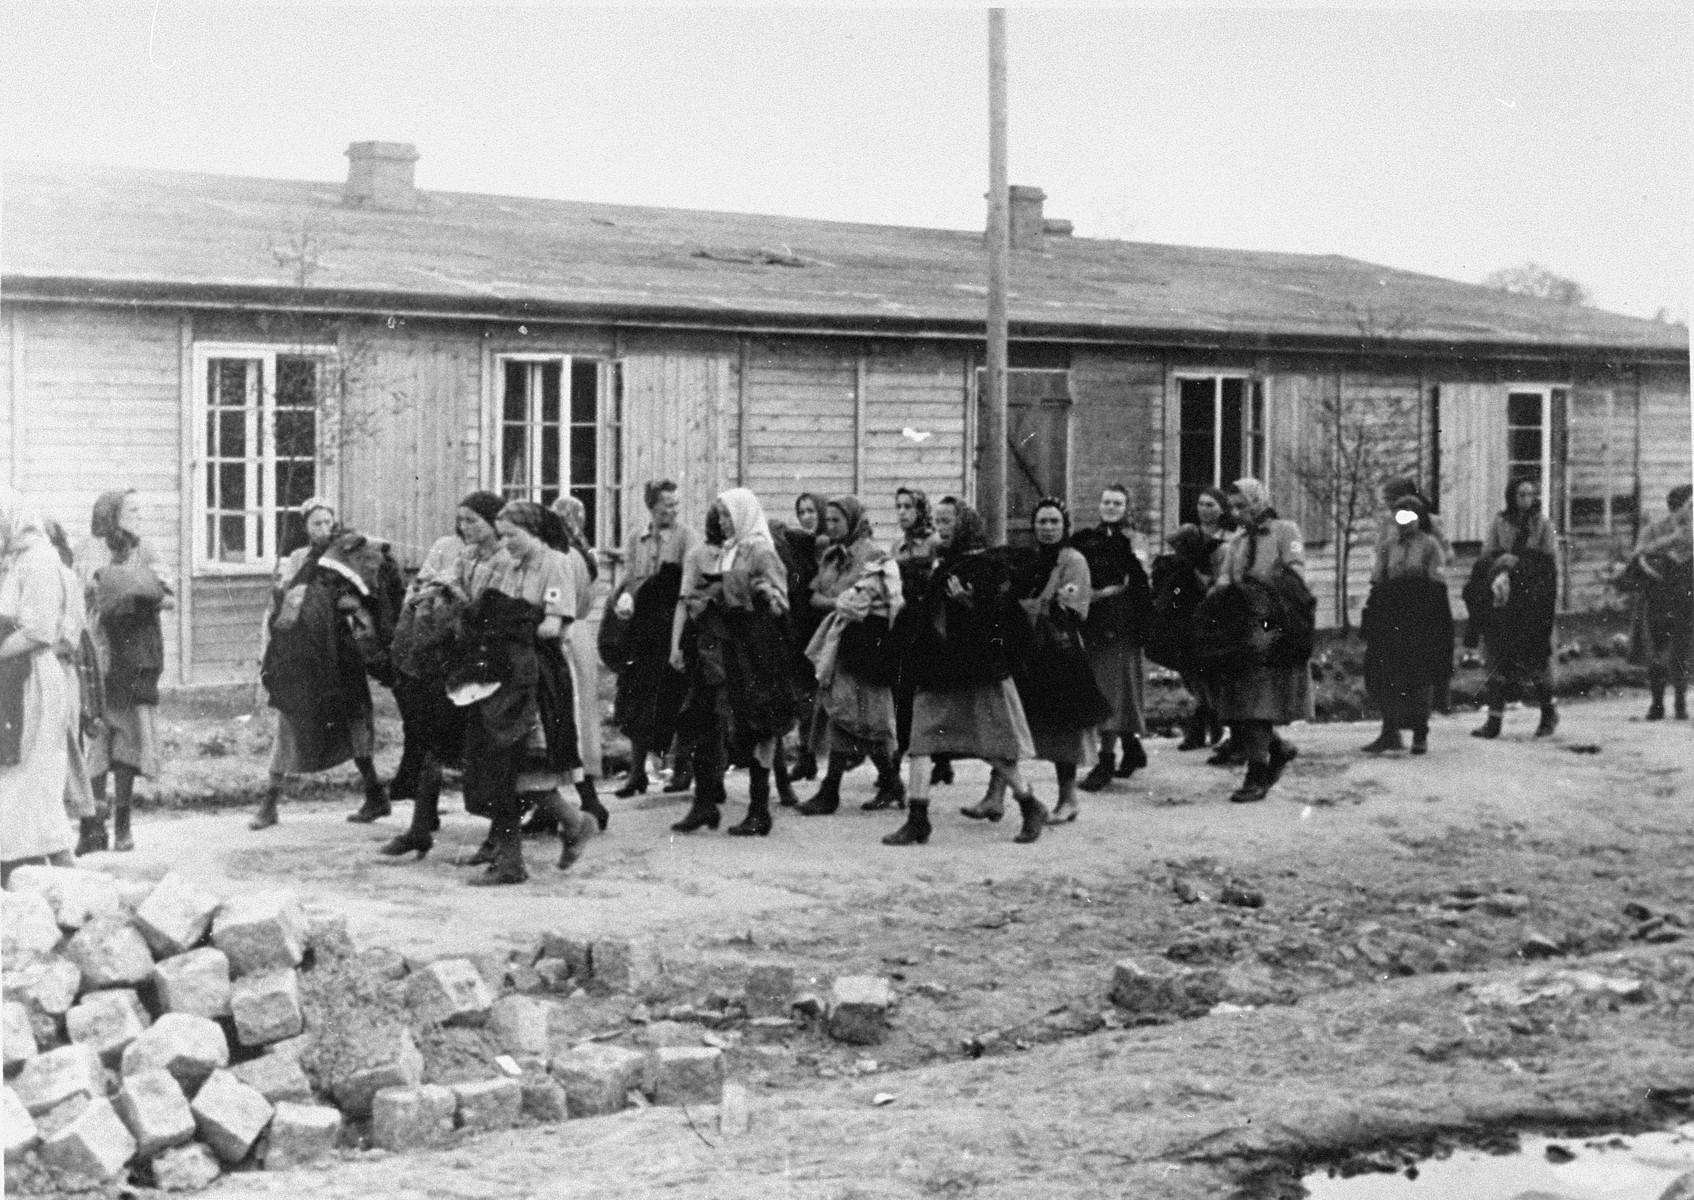 Jewish women from Subcarpathian Rus who have been selected for forced labor at Auschwitz-Birkenau, march toward their barracks after disinfection and headshaving.

According to Leo Cove, these women were on their way to pick up their bread rations. One of these women saved Mr. Cove's mother by pulling her from the line of women selected for death and sticking a loaf of bread in her hands.